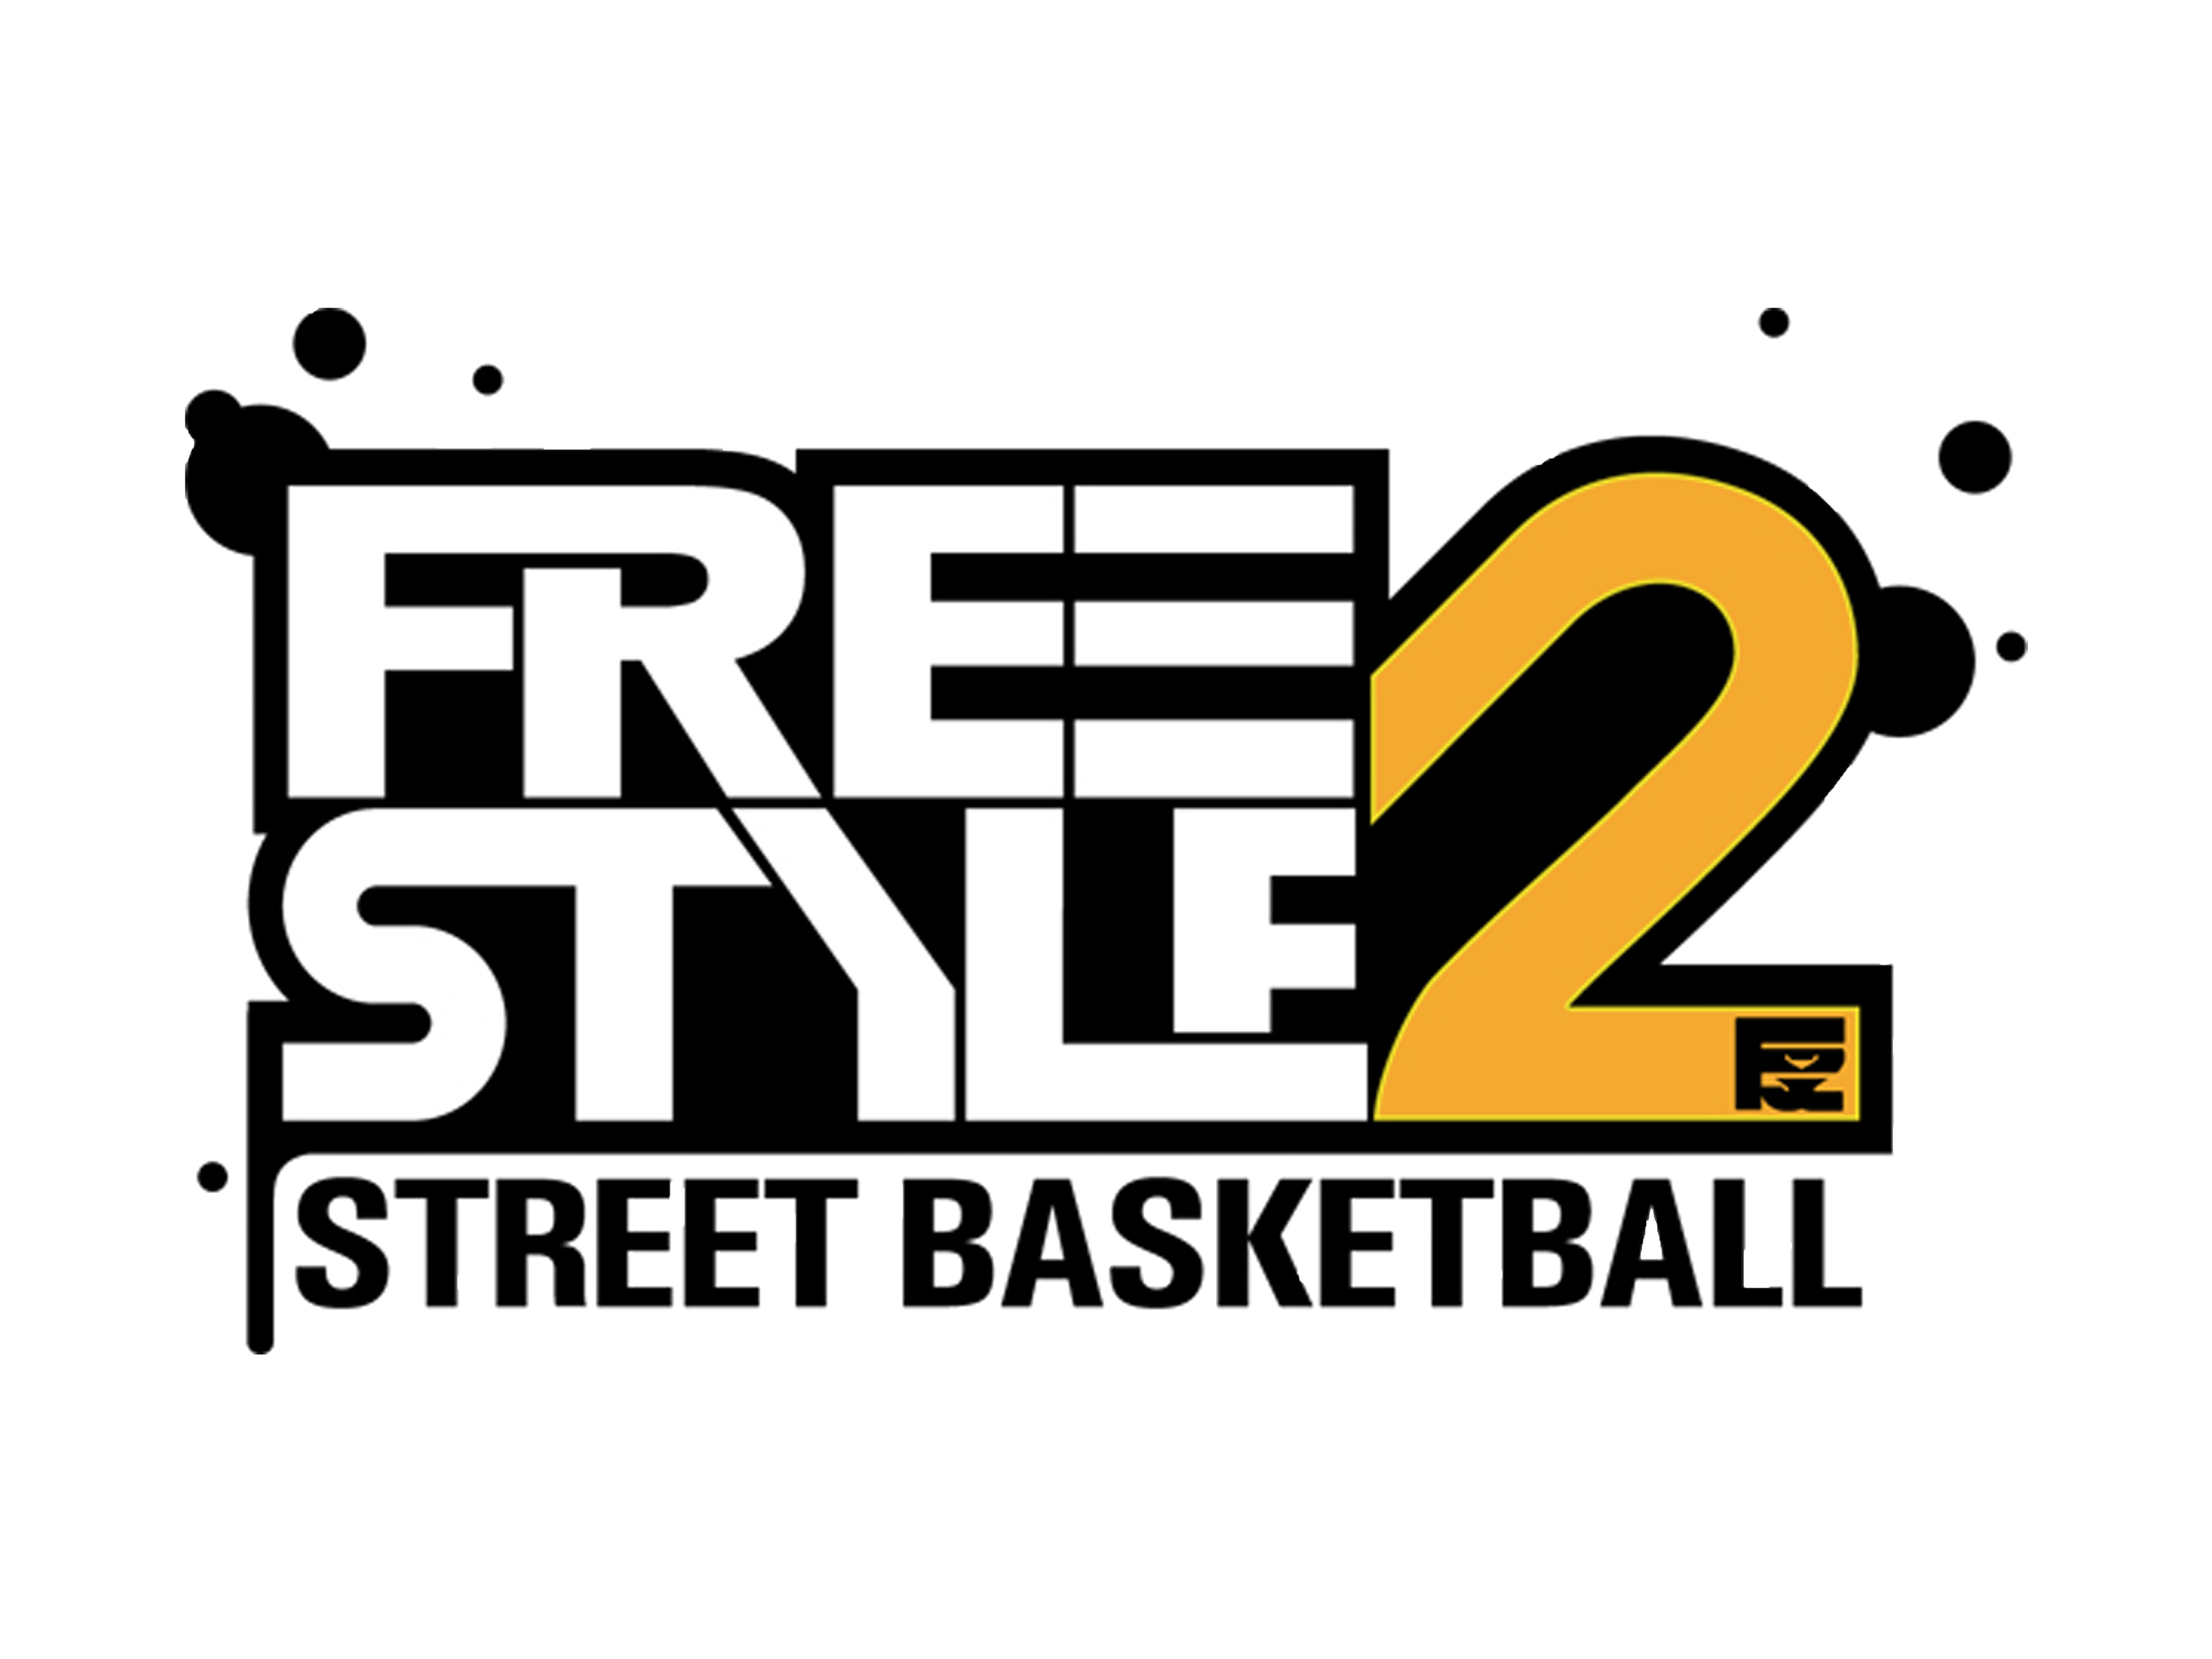 Images of FreeStyle2: Street Basketball | 4000x3000